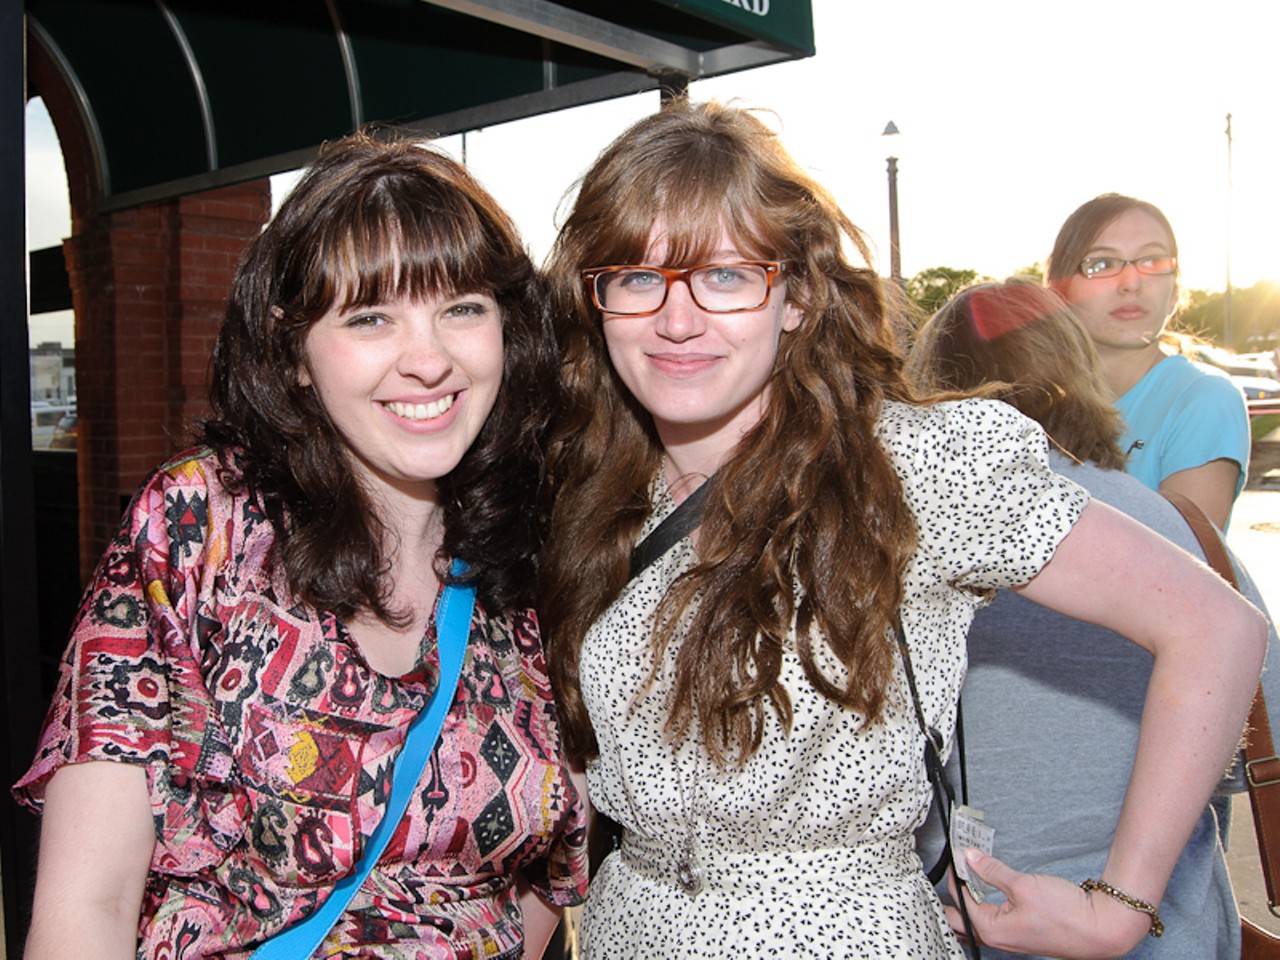 Linzy and Hannah drove four and a half hours (from Memphis, Tennessee) to see OK Go. Their arrival time in line? 1:30 pm.